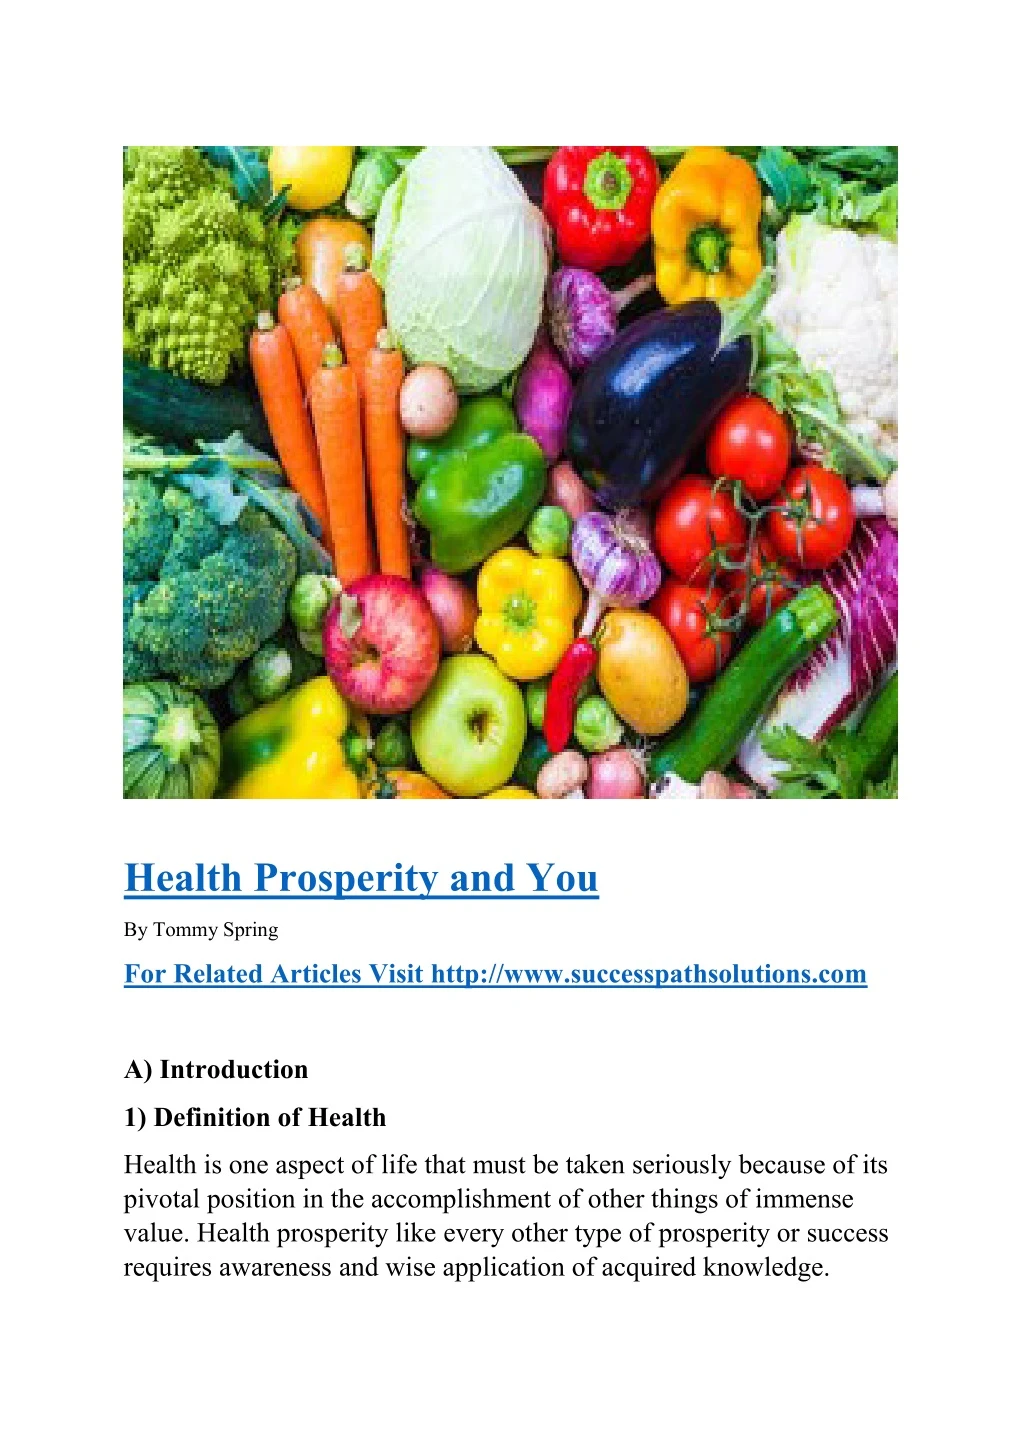 health prosperity and you